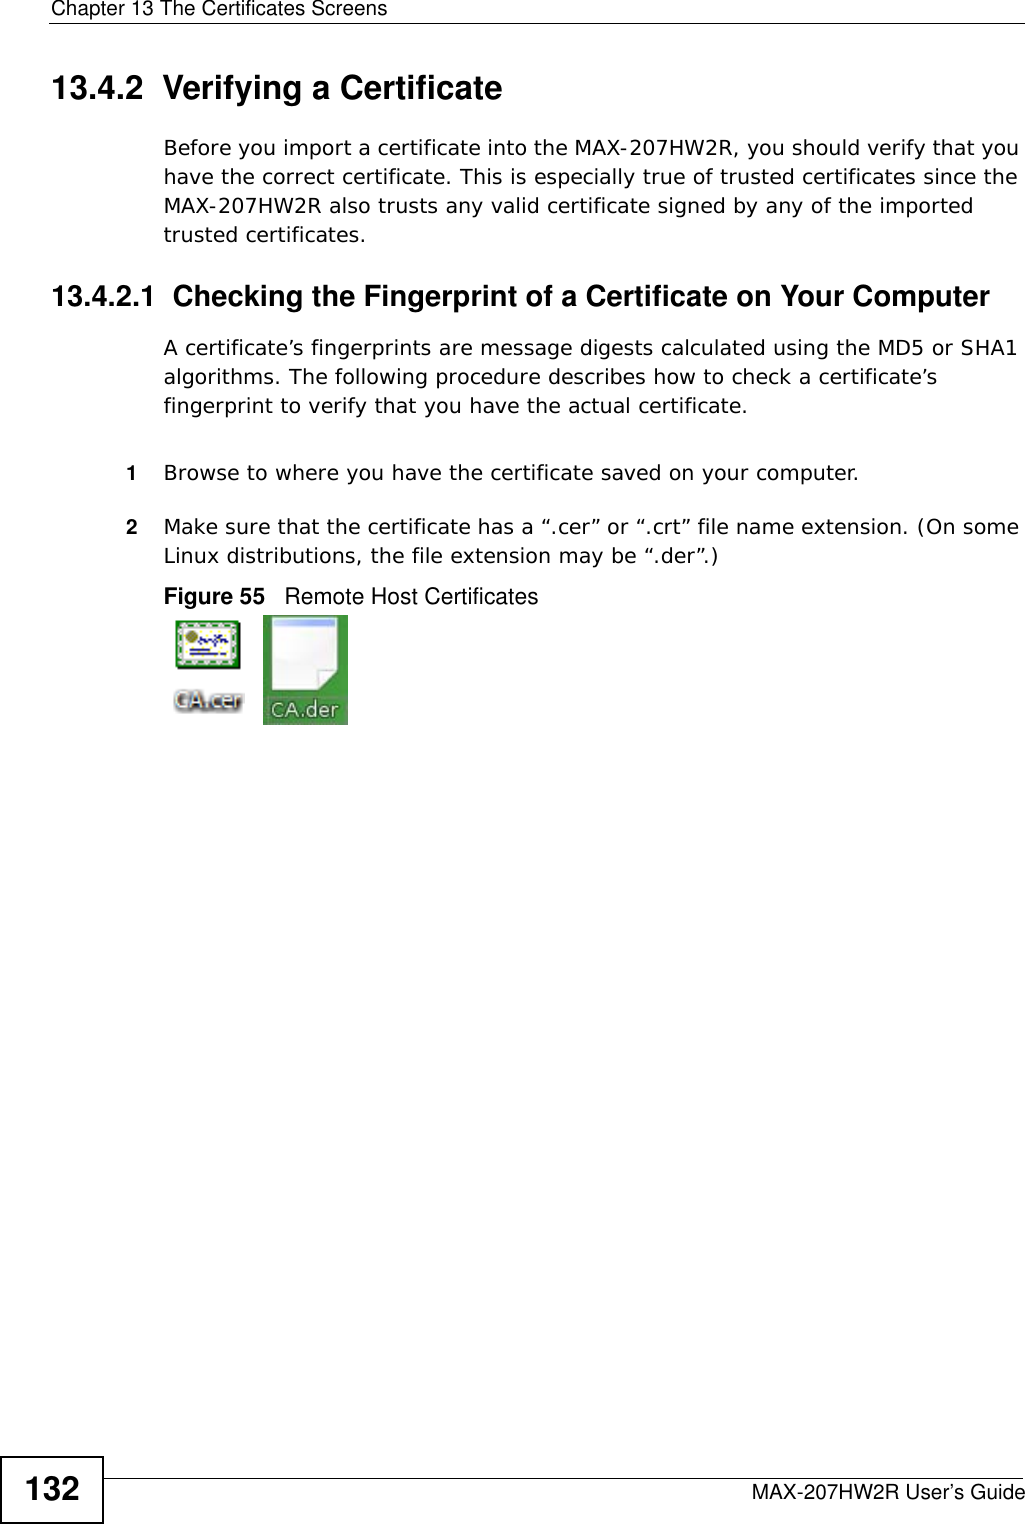 Chapter 13 The Certificates ScreensMAX-207HW2R User’s Guide13213.4.2  Verifying a CertificateBefore you import a certificate into the MAX-207HW2R, you should verify that you have the correct certificate. This is especially true of trusted certificates since the MAX-207HW2R also trusts any valid certificate signed by any of the imported trusted certificates.13.4.2.1  Checking the Fingerprint of a Certificate on Your ComputerA certificate’s fingerprints are message digests calculated using the MD5 or SHA1 algorithms. The following procedure describes how to check a certificate’s fingerprint to verify that you have the actual certificate. 1Browse to where you have the certificate saved on your computer. 2Make sure that the certificate has a “.cer” or “.crt” file name extension. (On some Linux distributions, the file extension may be “.der”.)Figure 55   Remote Host Certificates